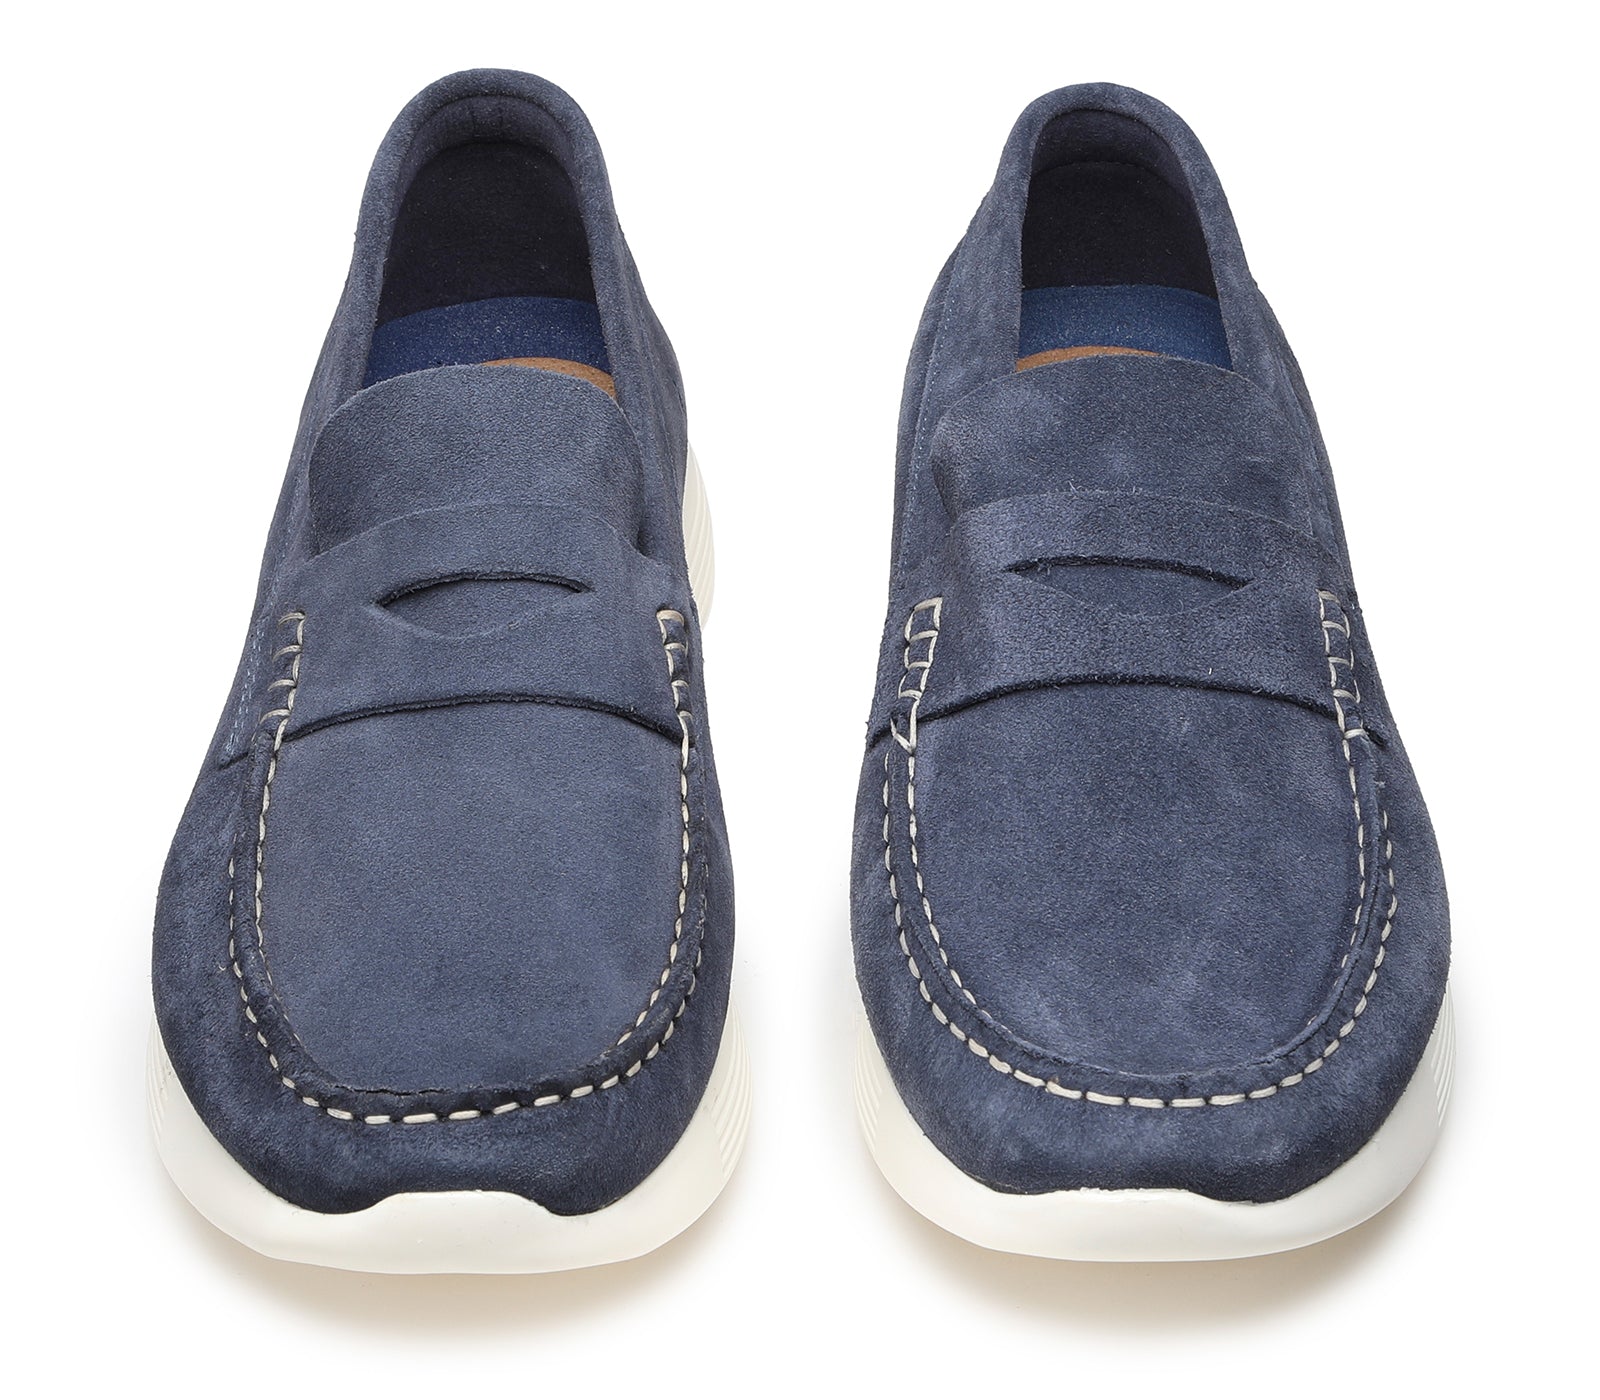 Men's Moccasins in Suede Leather